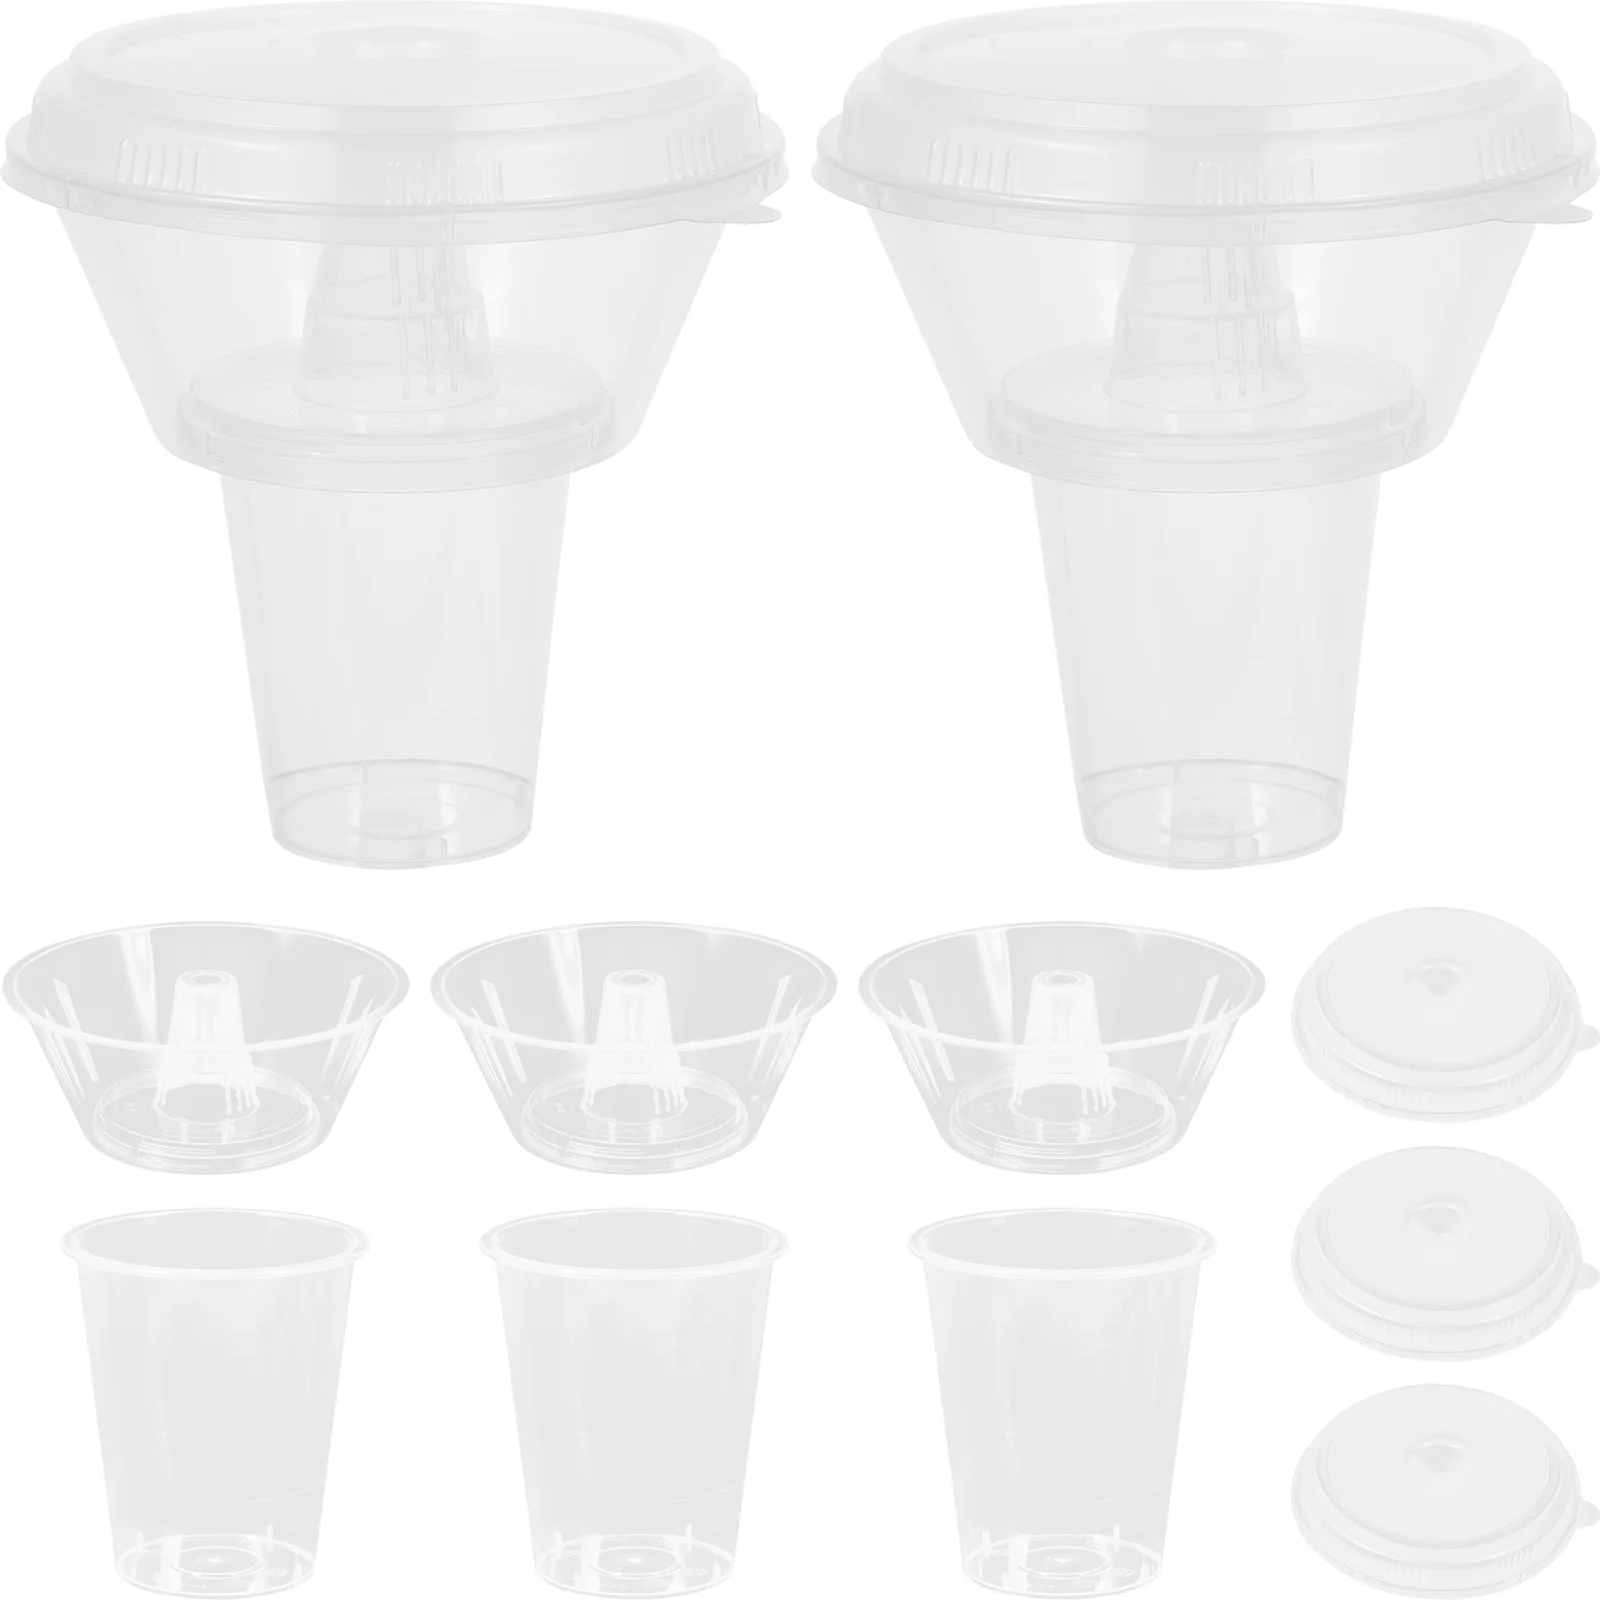 

5 Sets Water Glasses Drink Cup Outdoor Thickened Beverage Compact Food Bowl Snack Containers with Lids Portable